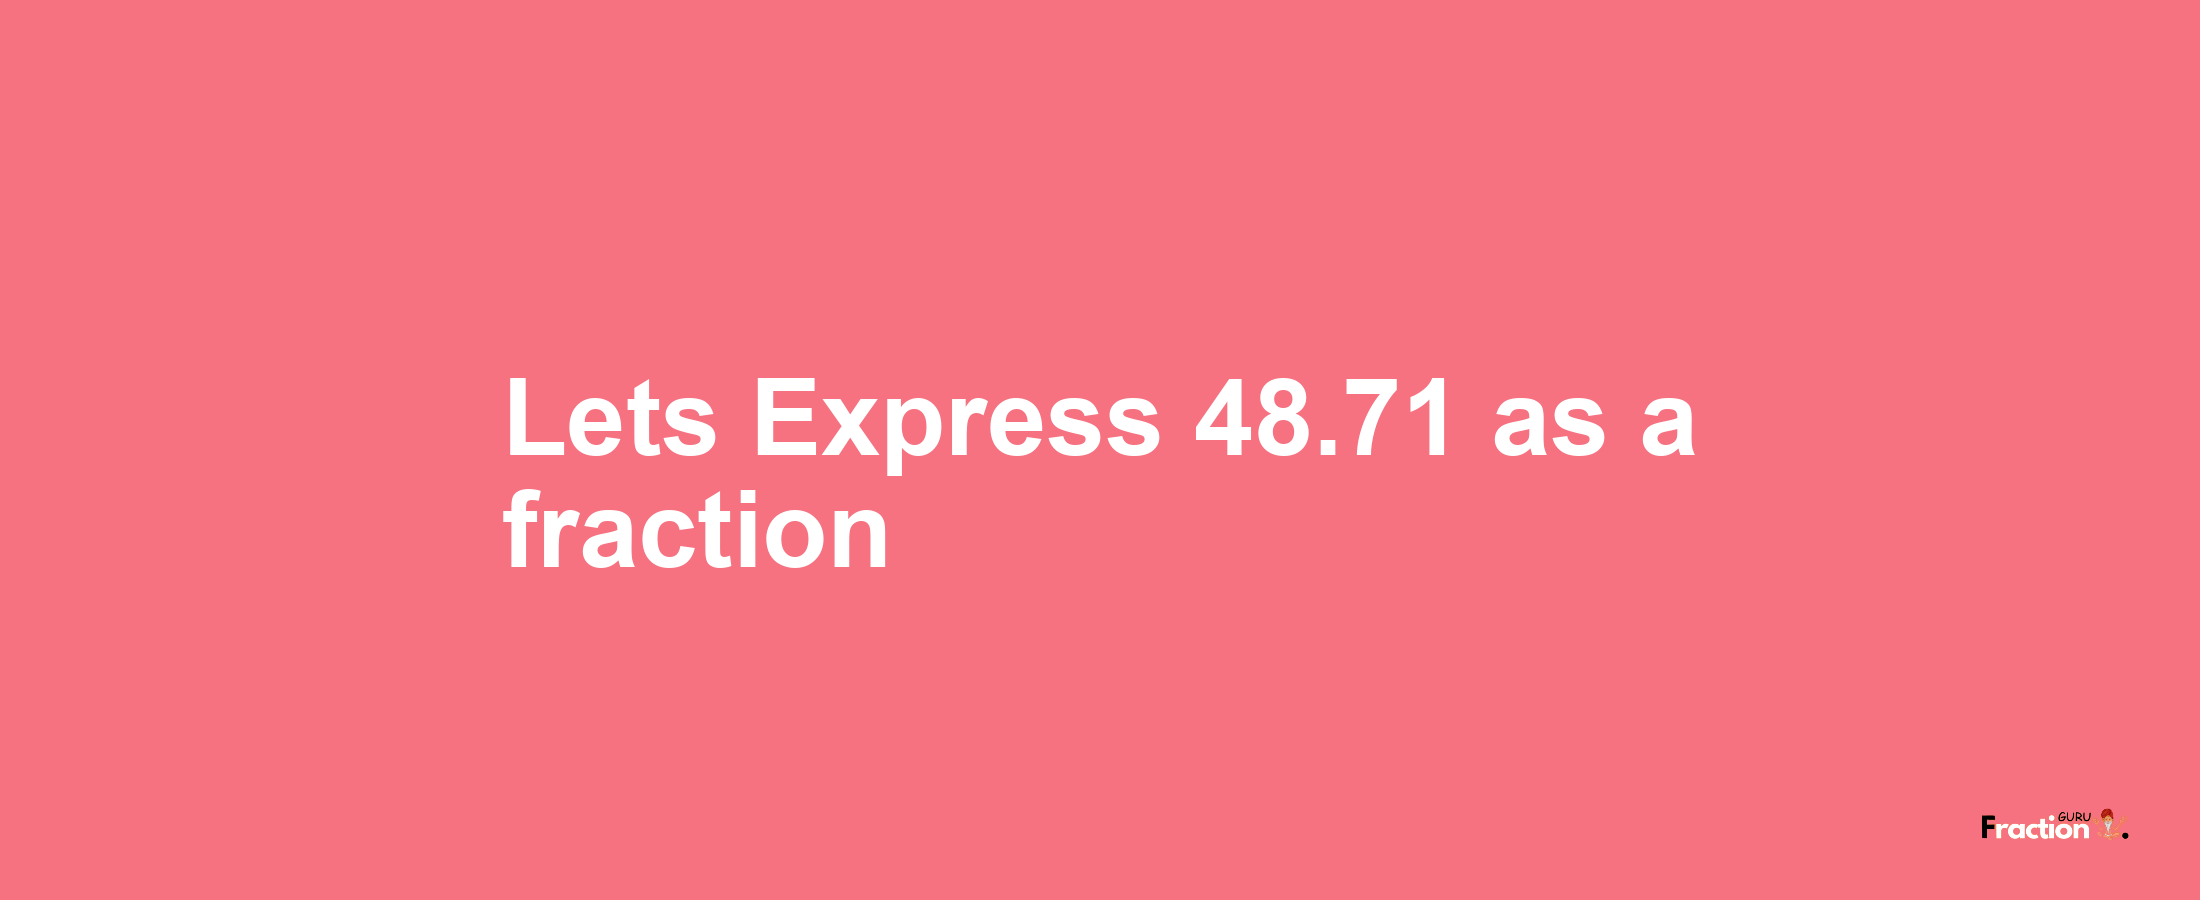 Lets Express 48.71 as afraction